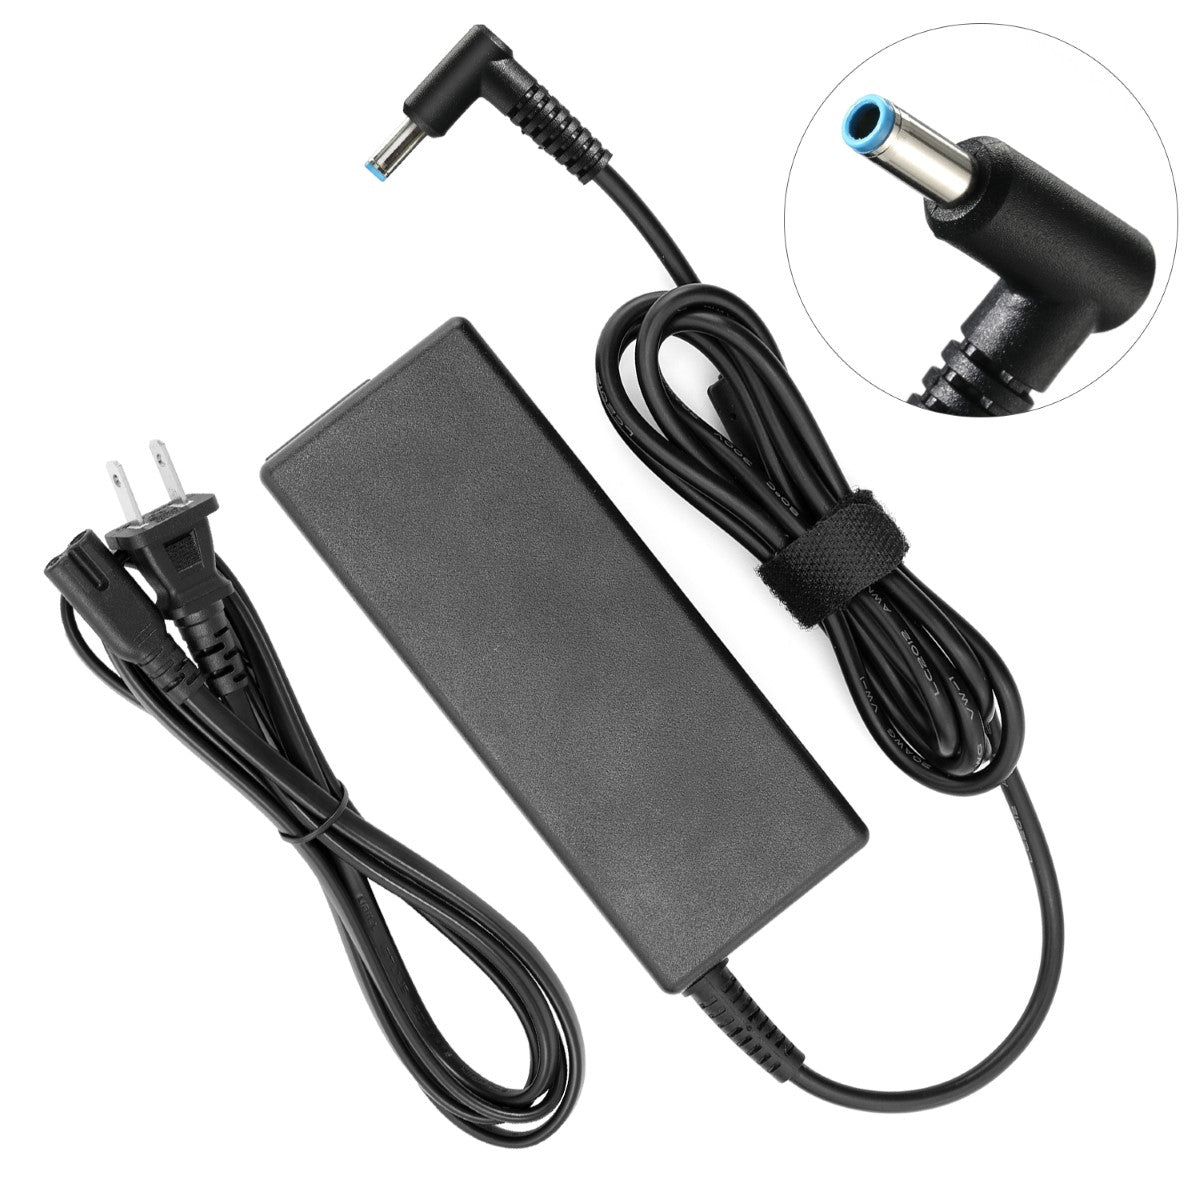 AC Adapter Charger for hp Envy Touchsmart 15t-k000 Notebook.